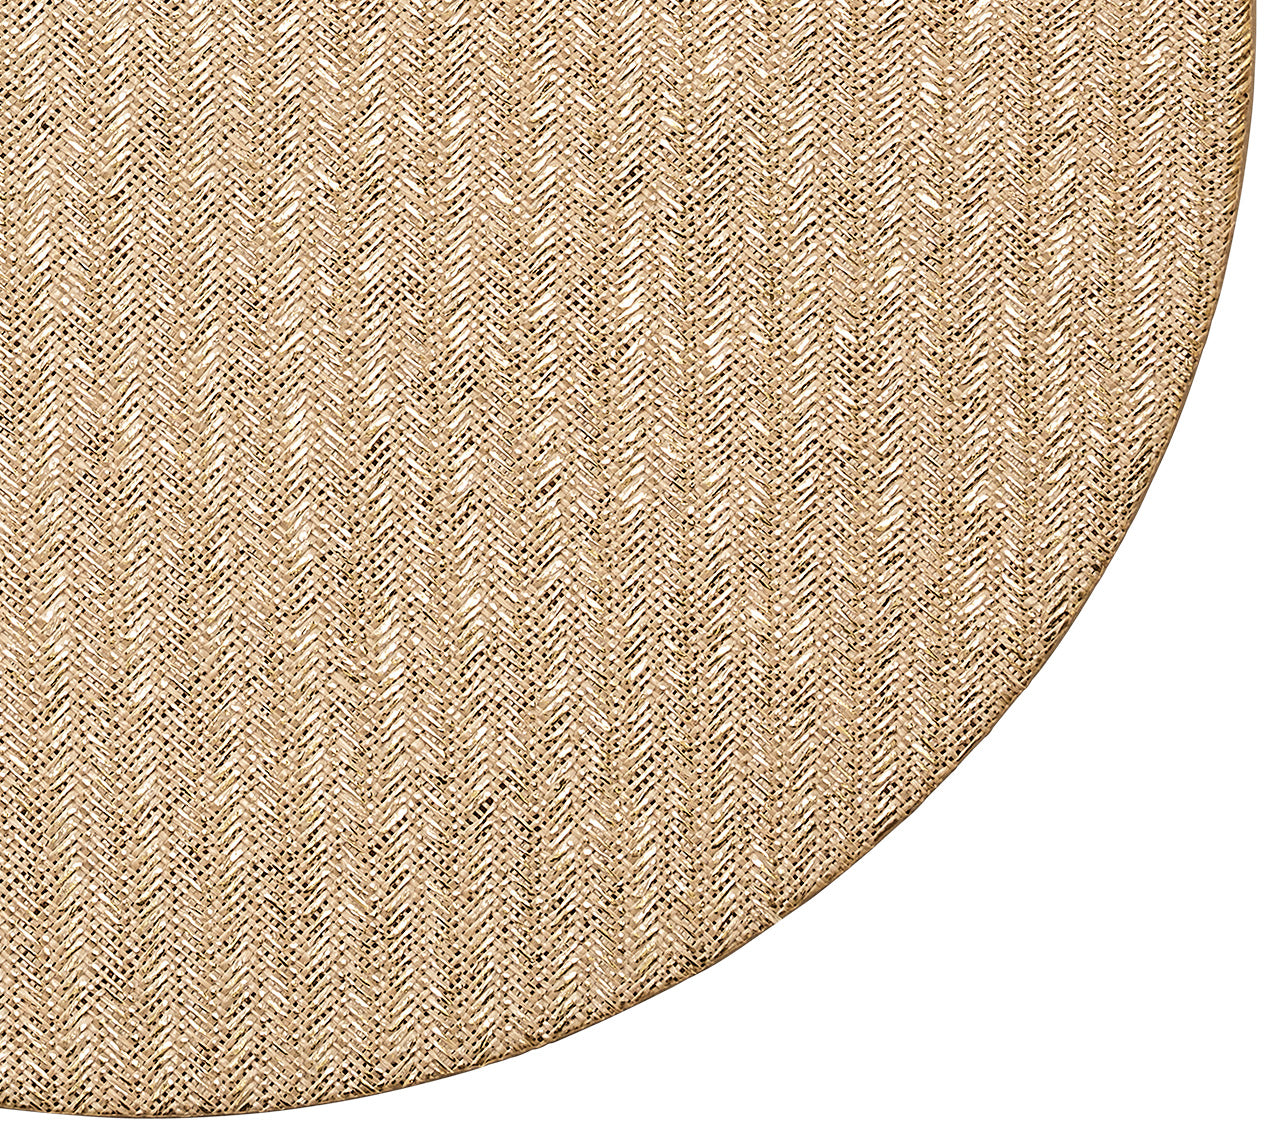 Glam Grass Placemat in Natural & Gold, Set of 4